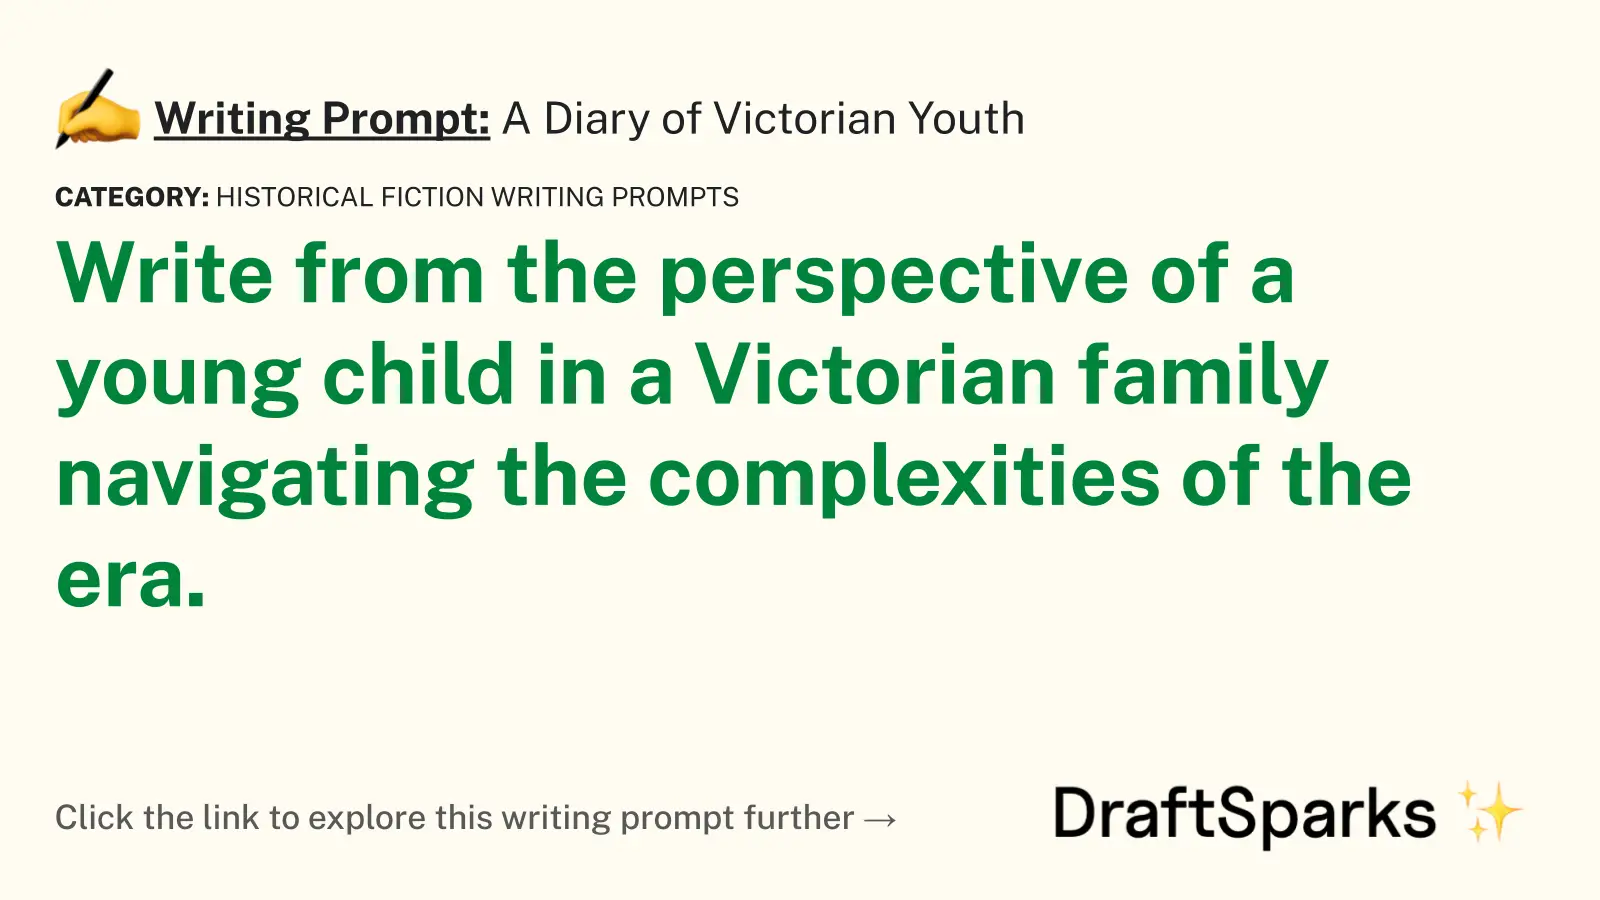 A Diary of Victorian Youth